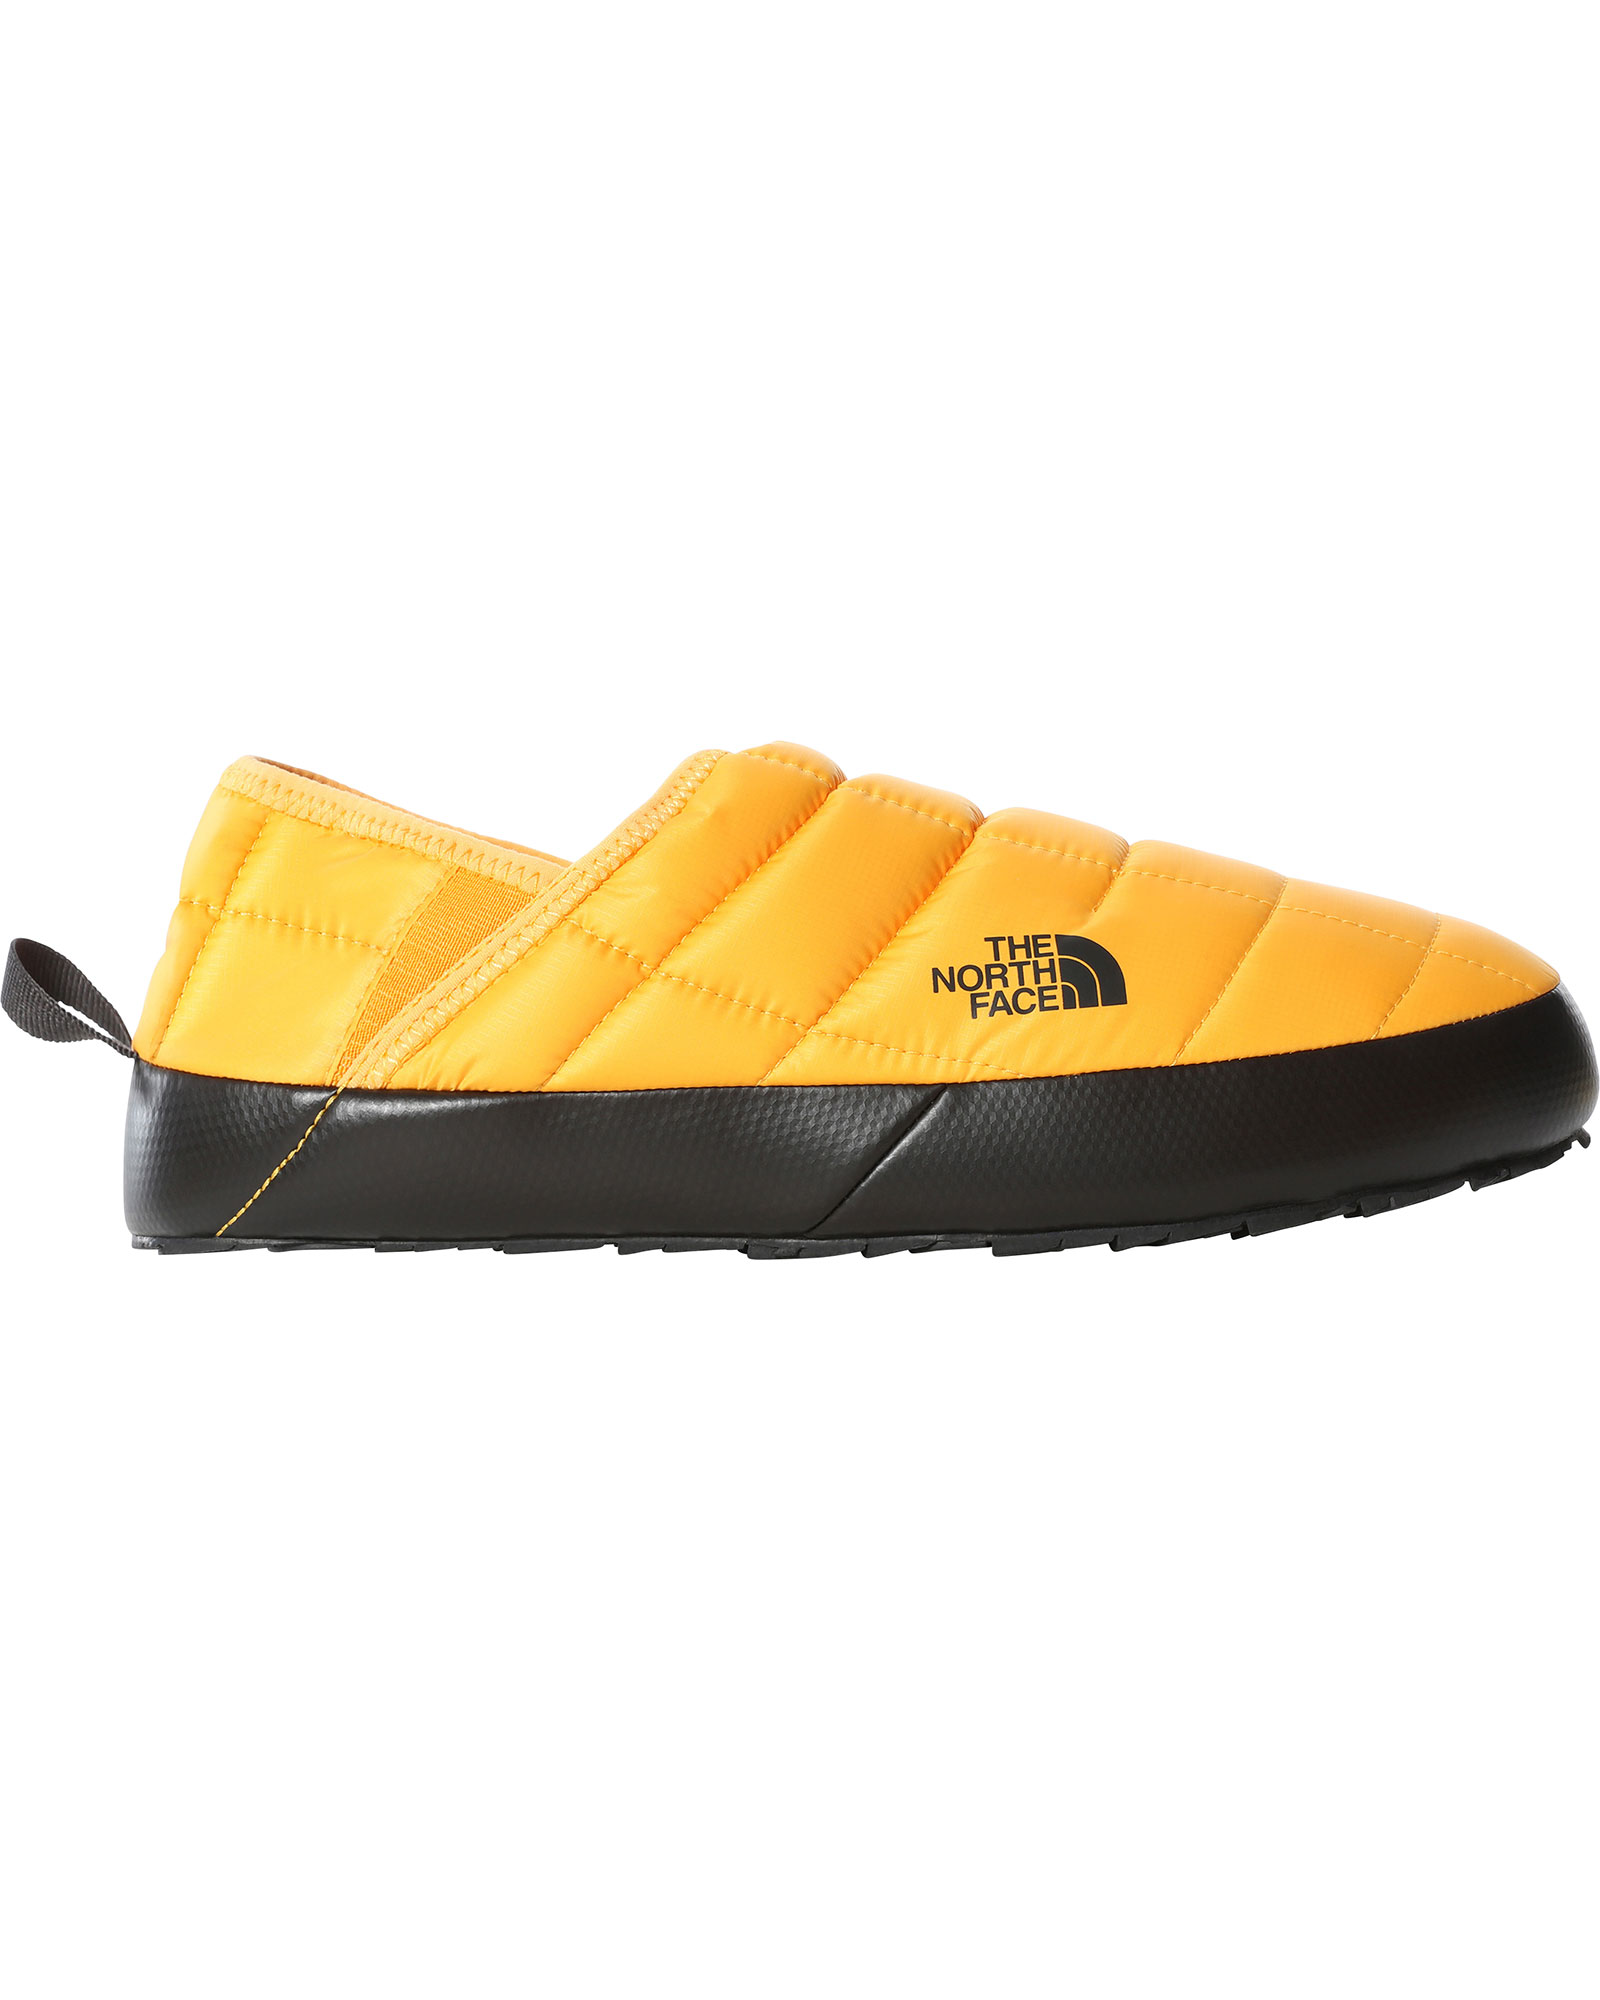 The North Face Men’s ThermoBall V Traction Mules - Summit Gold/TNF Black UK 12